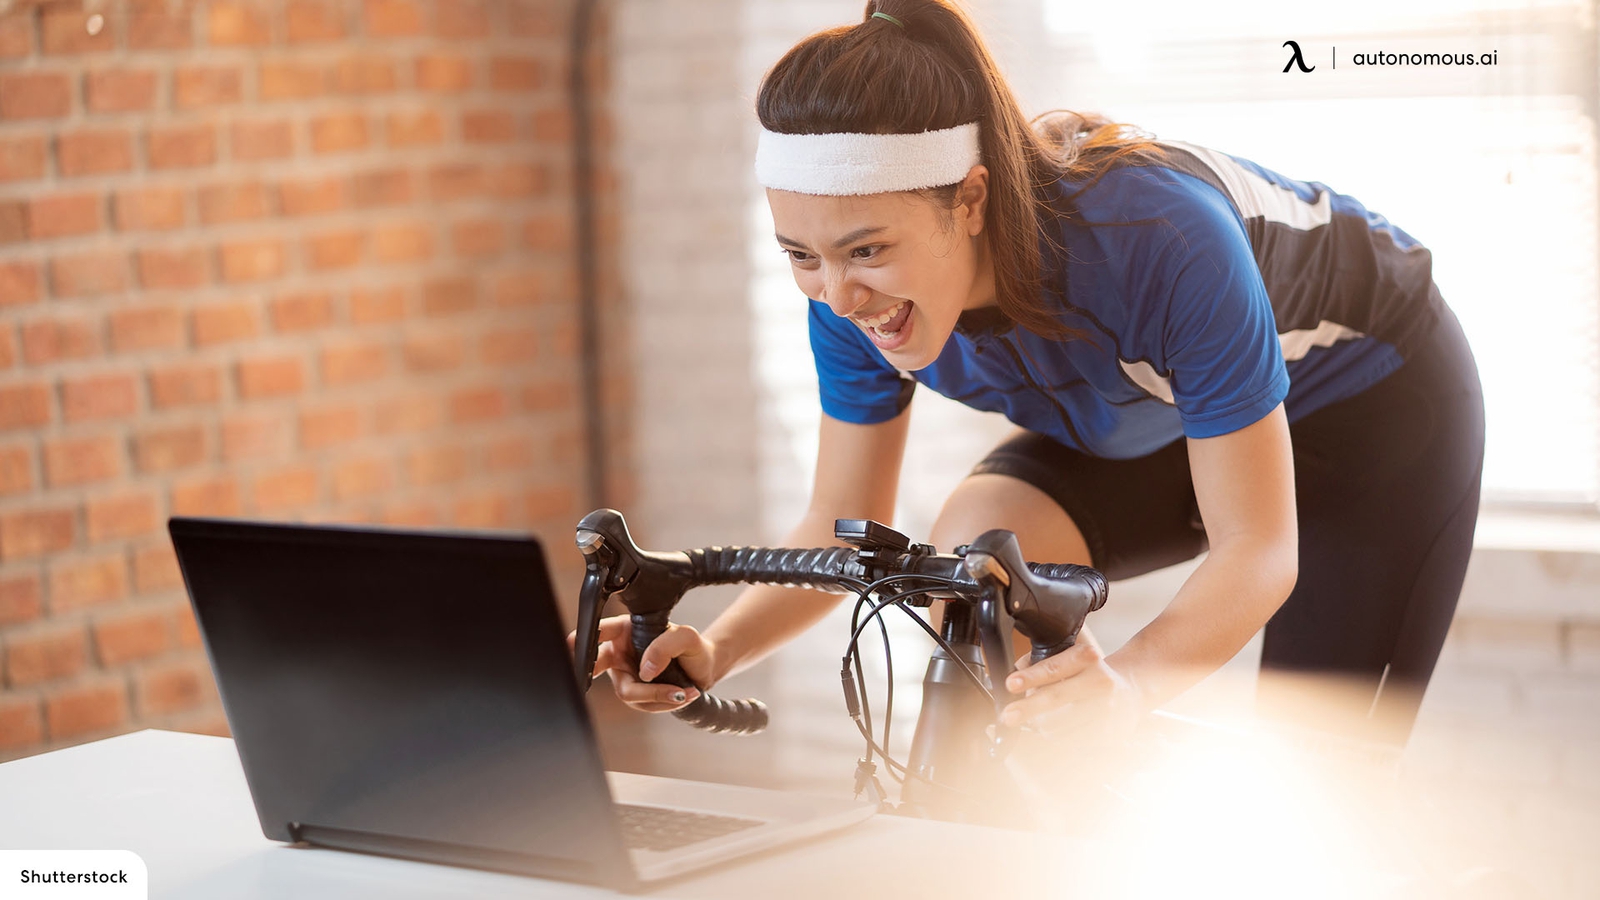 Benefits of Indoor Cycling on Physical and Mental Health